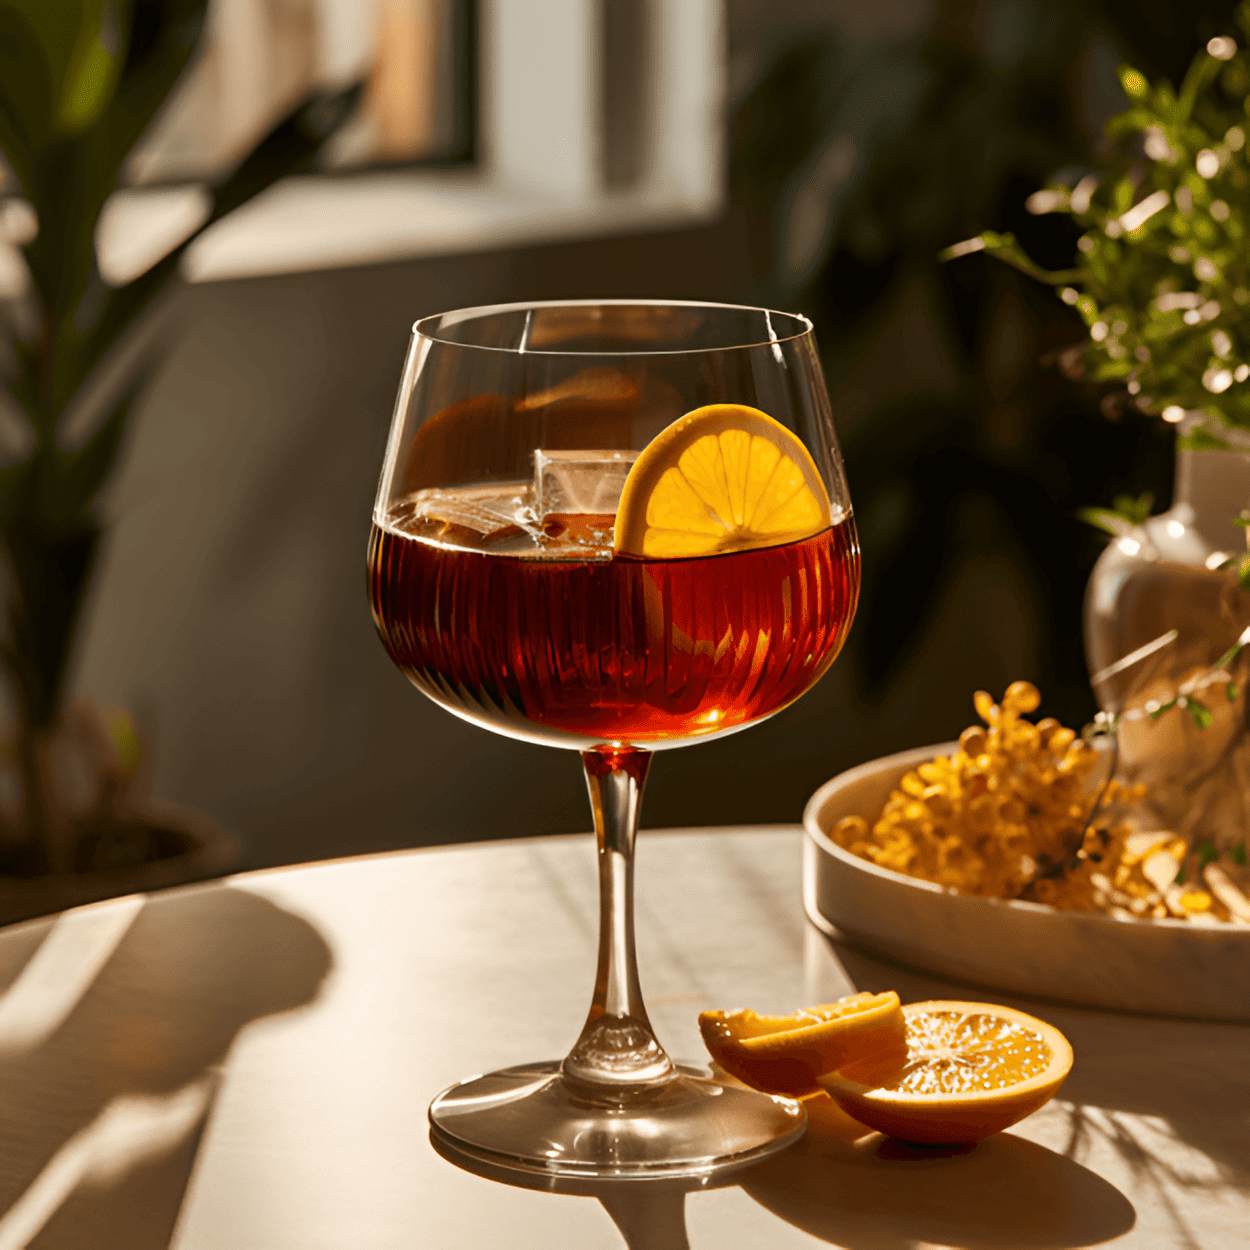 Tawny Port Cocktail Recipe - The Tawny Port Cocktail has a rich, sweet, and slightly fruity taste. It has notes of caramel, nuts, and dried fruits, with a hint of vanilla and a smooth, velvety finish.